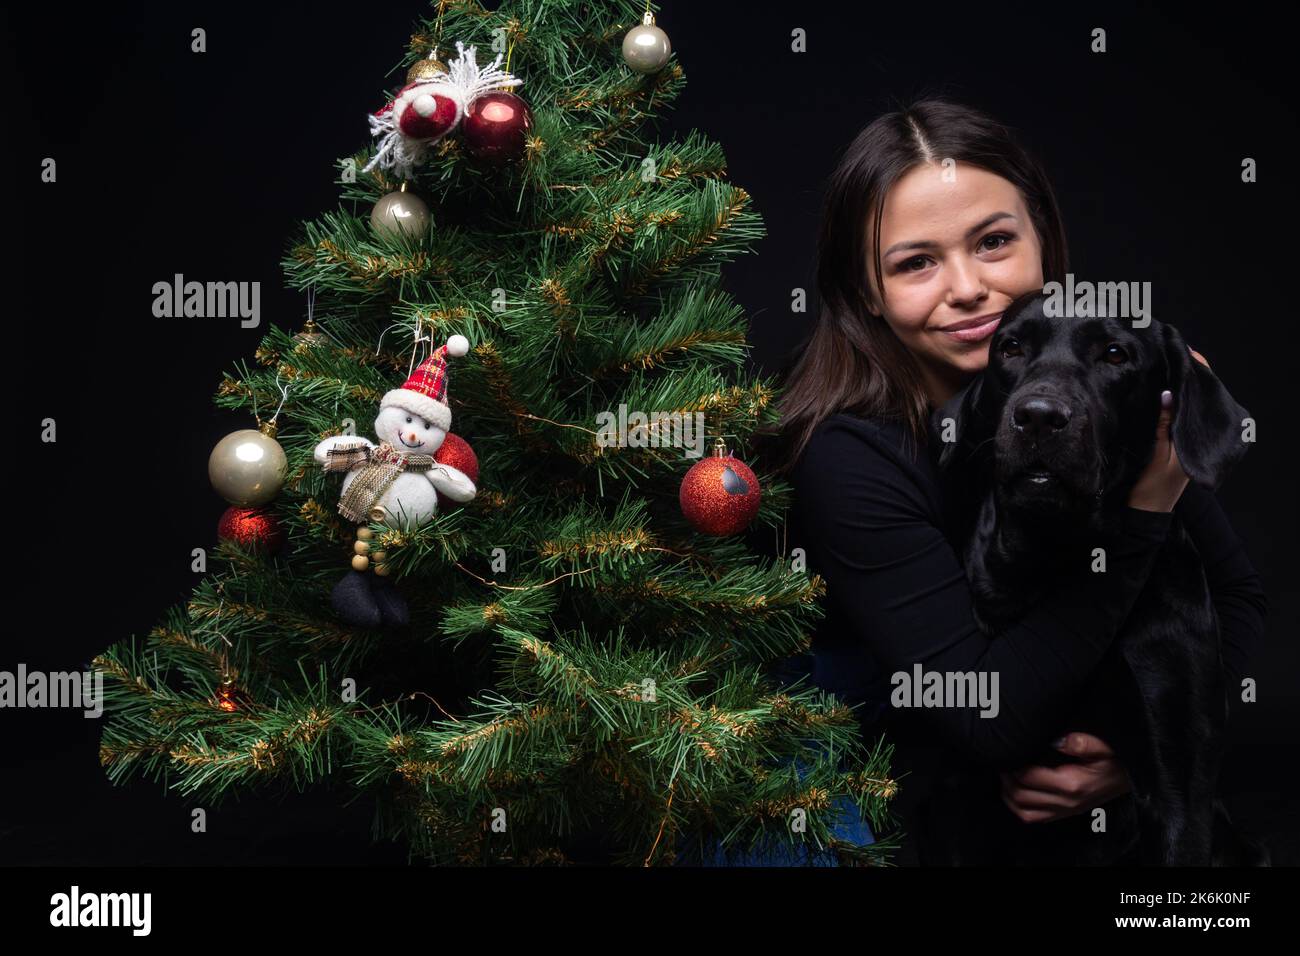 Portrait of a Labrador Retriever dog with its owner, near the new year's green tree. The picture was taken in a photo Studio on a black background. Stock Photo